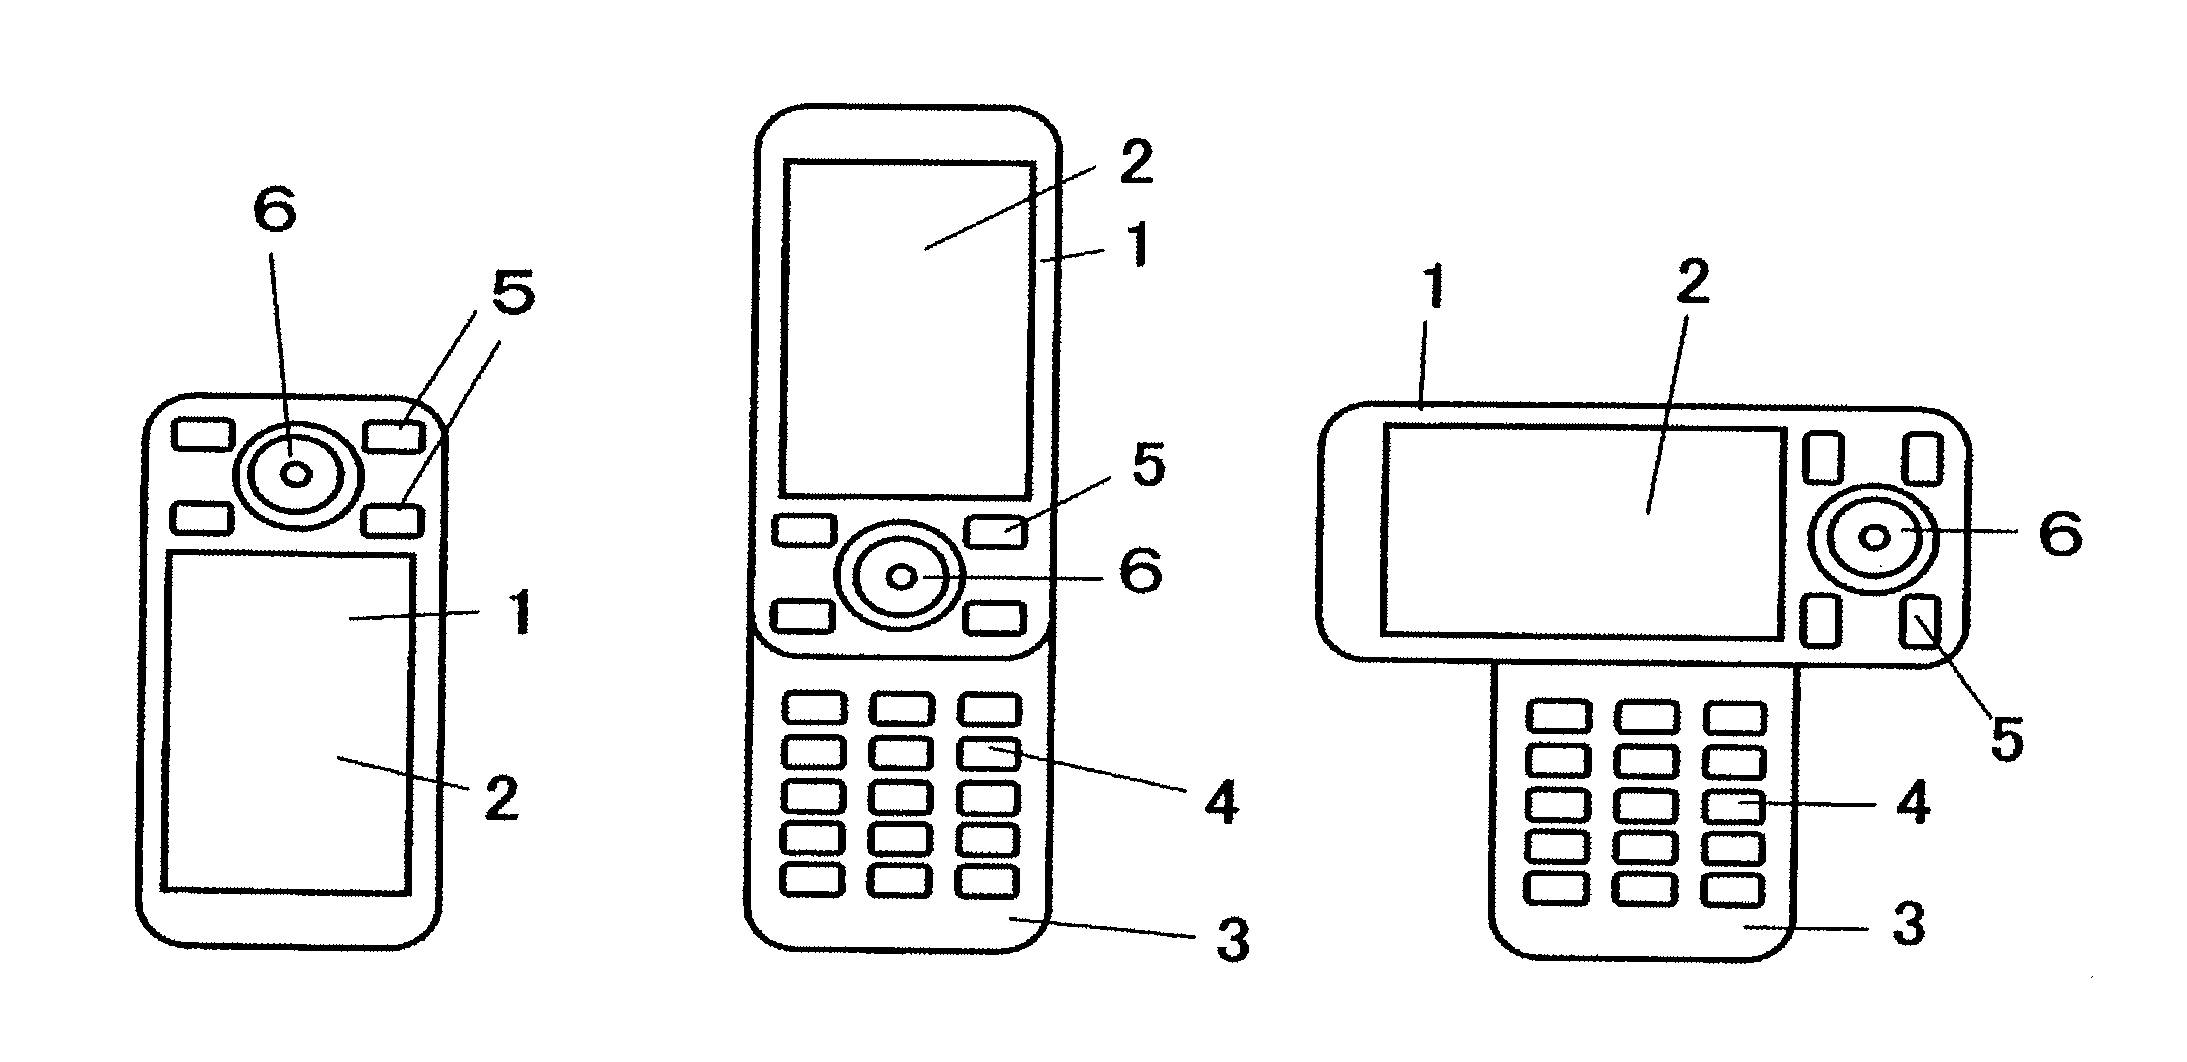 Mobile Device